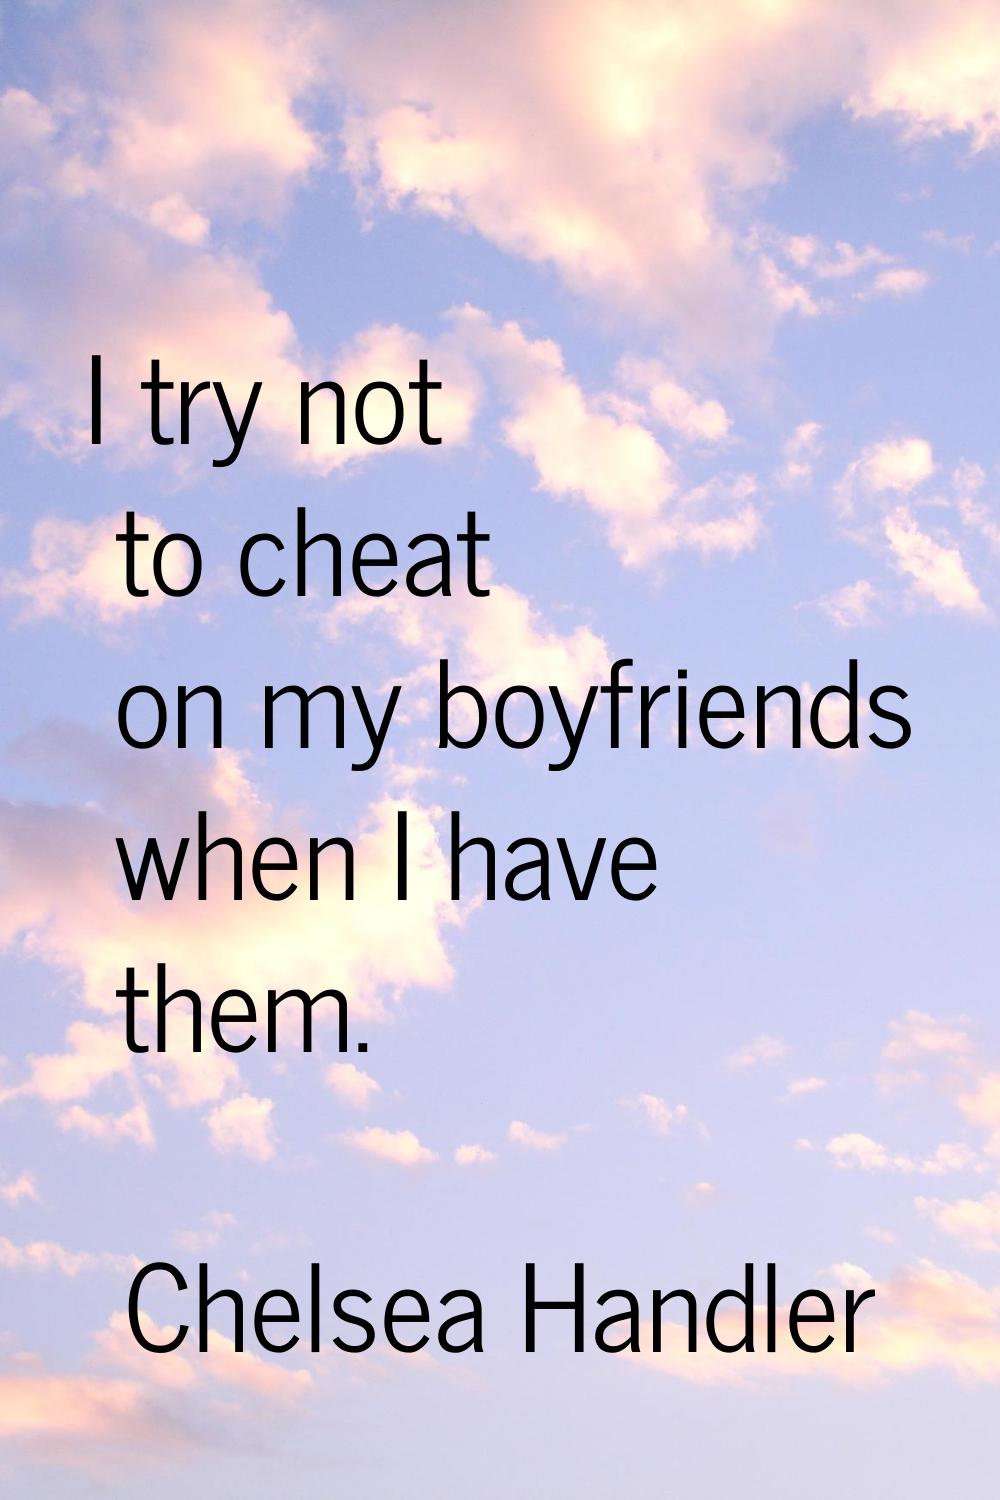 I try not to cheat on my boyfriends when I have them.